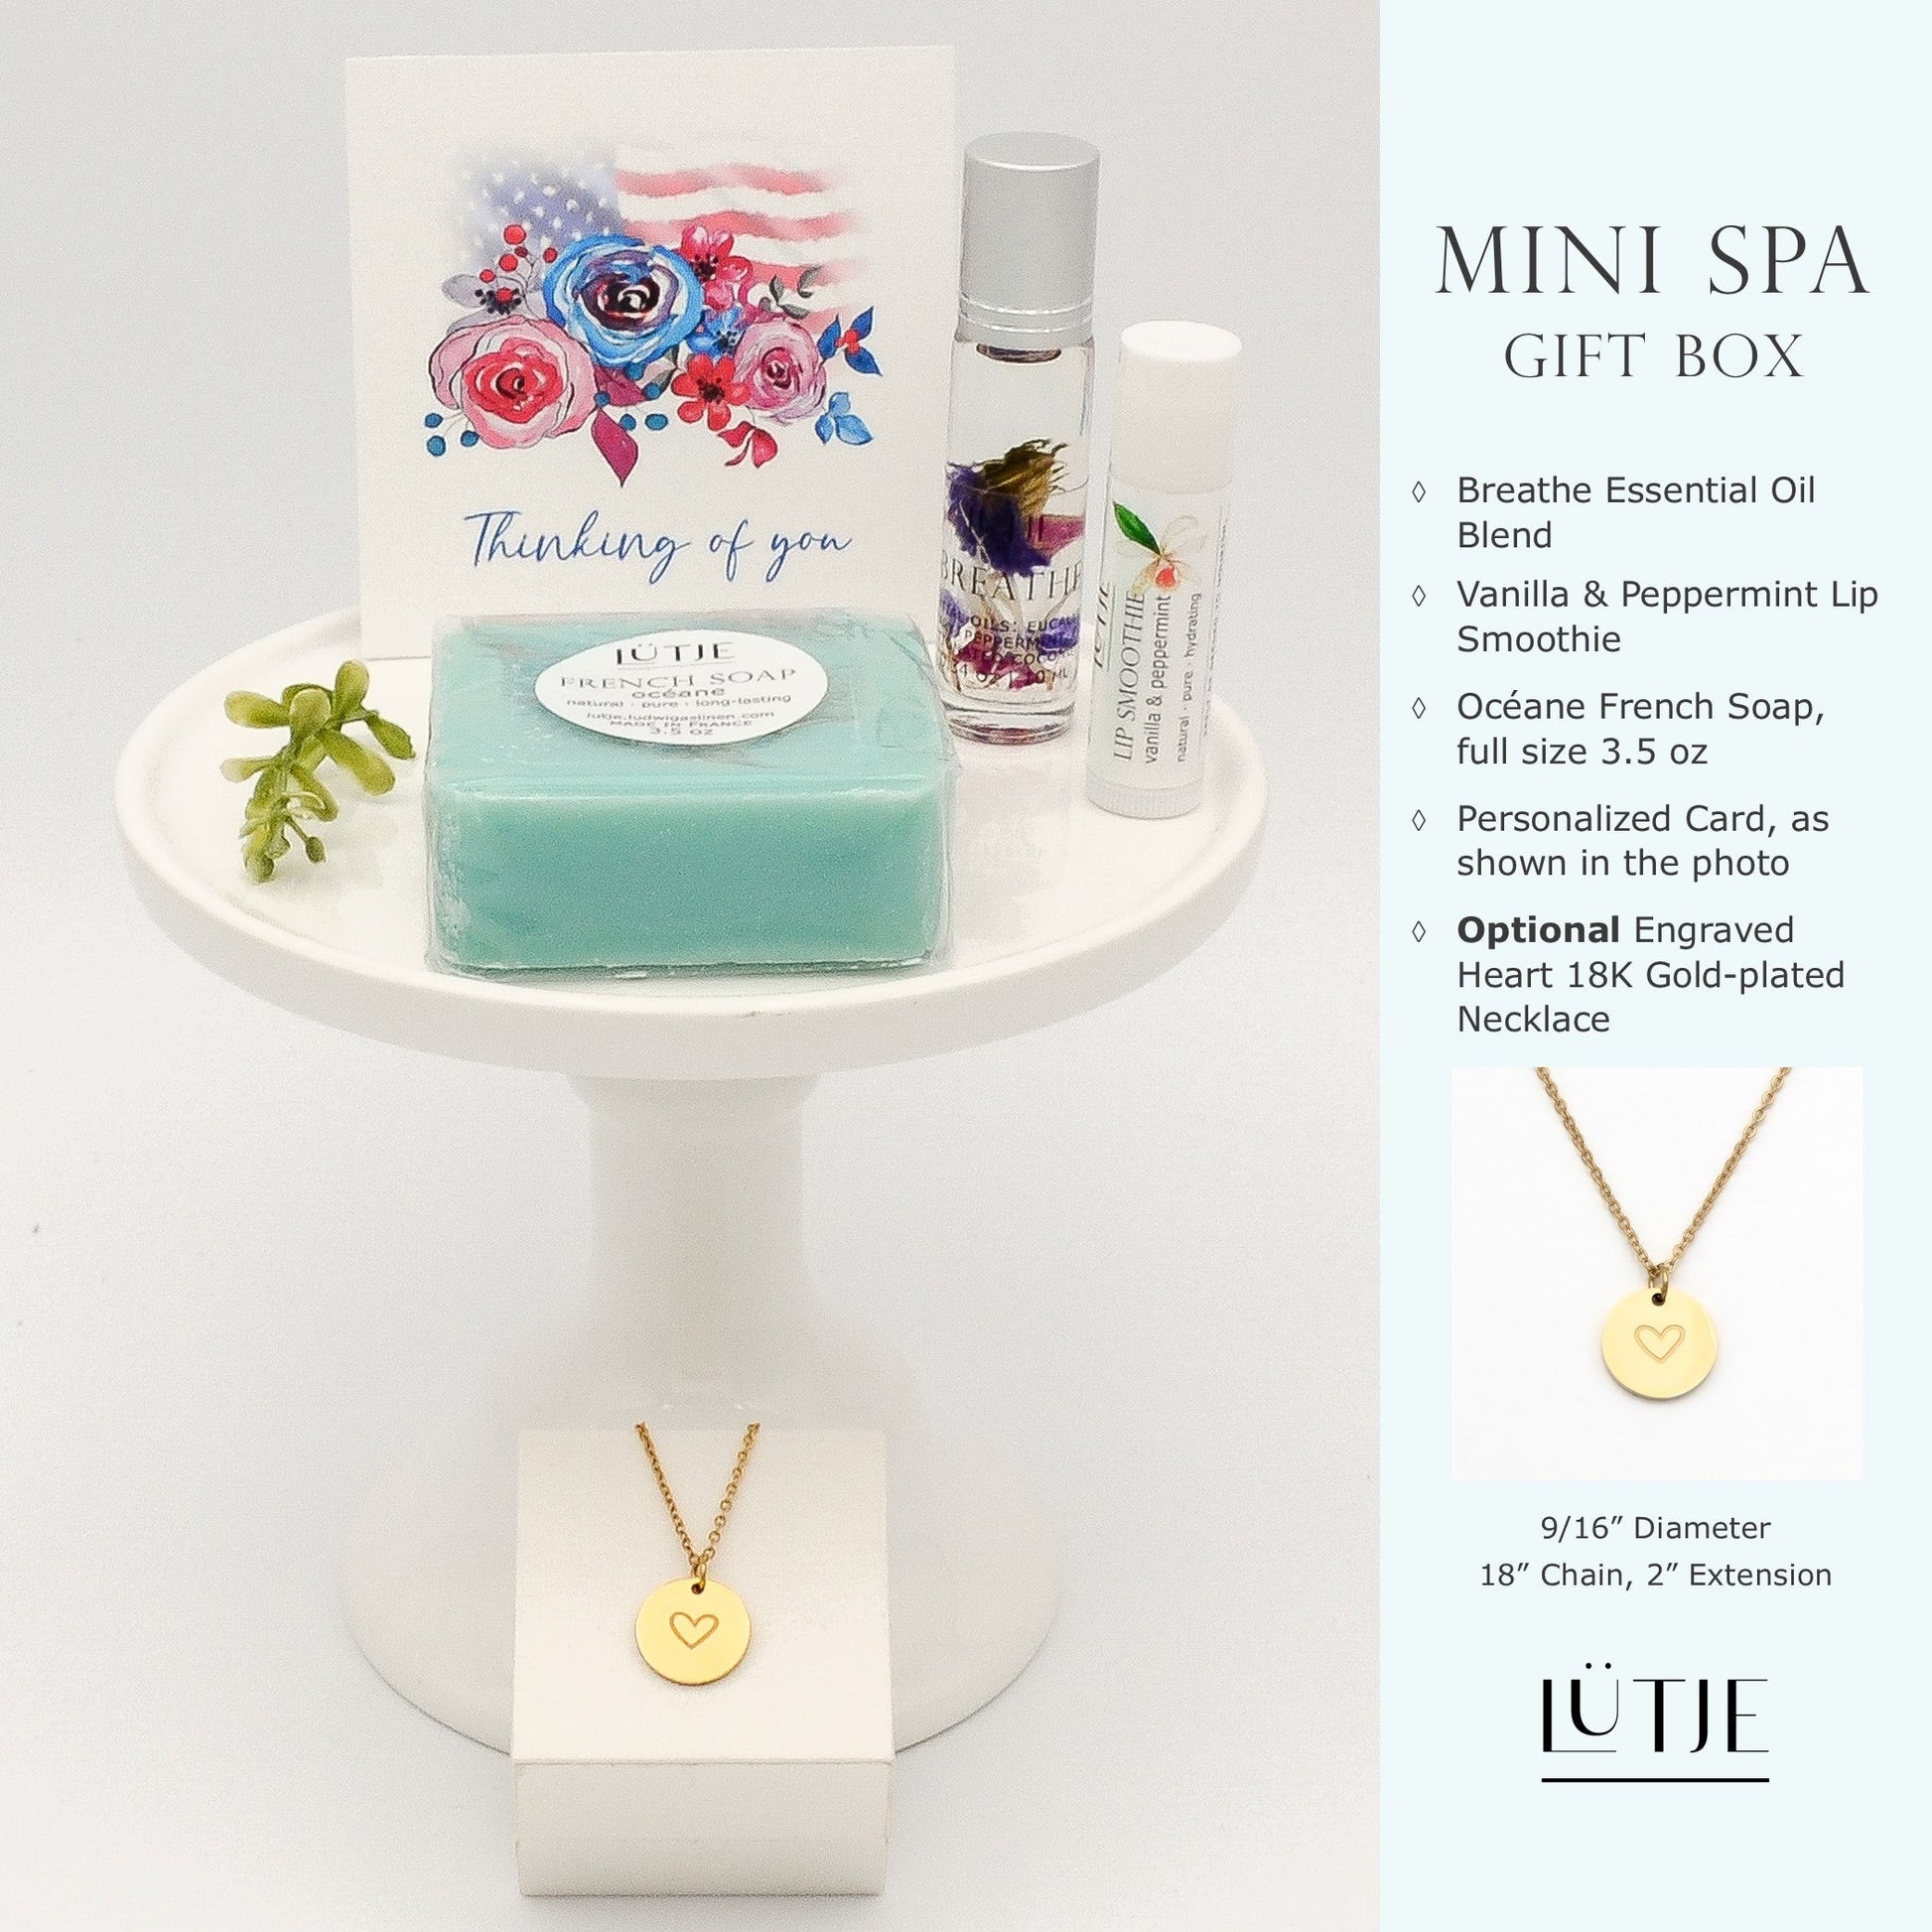 Mini Spa Gift Box for women, sister, daughter, mom, BFF, wife or grandma, includes essential oil, French soap, lip balm, and 18K gold-plated necklace with engraved heart.